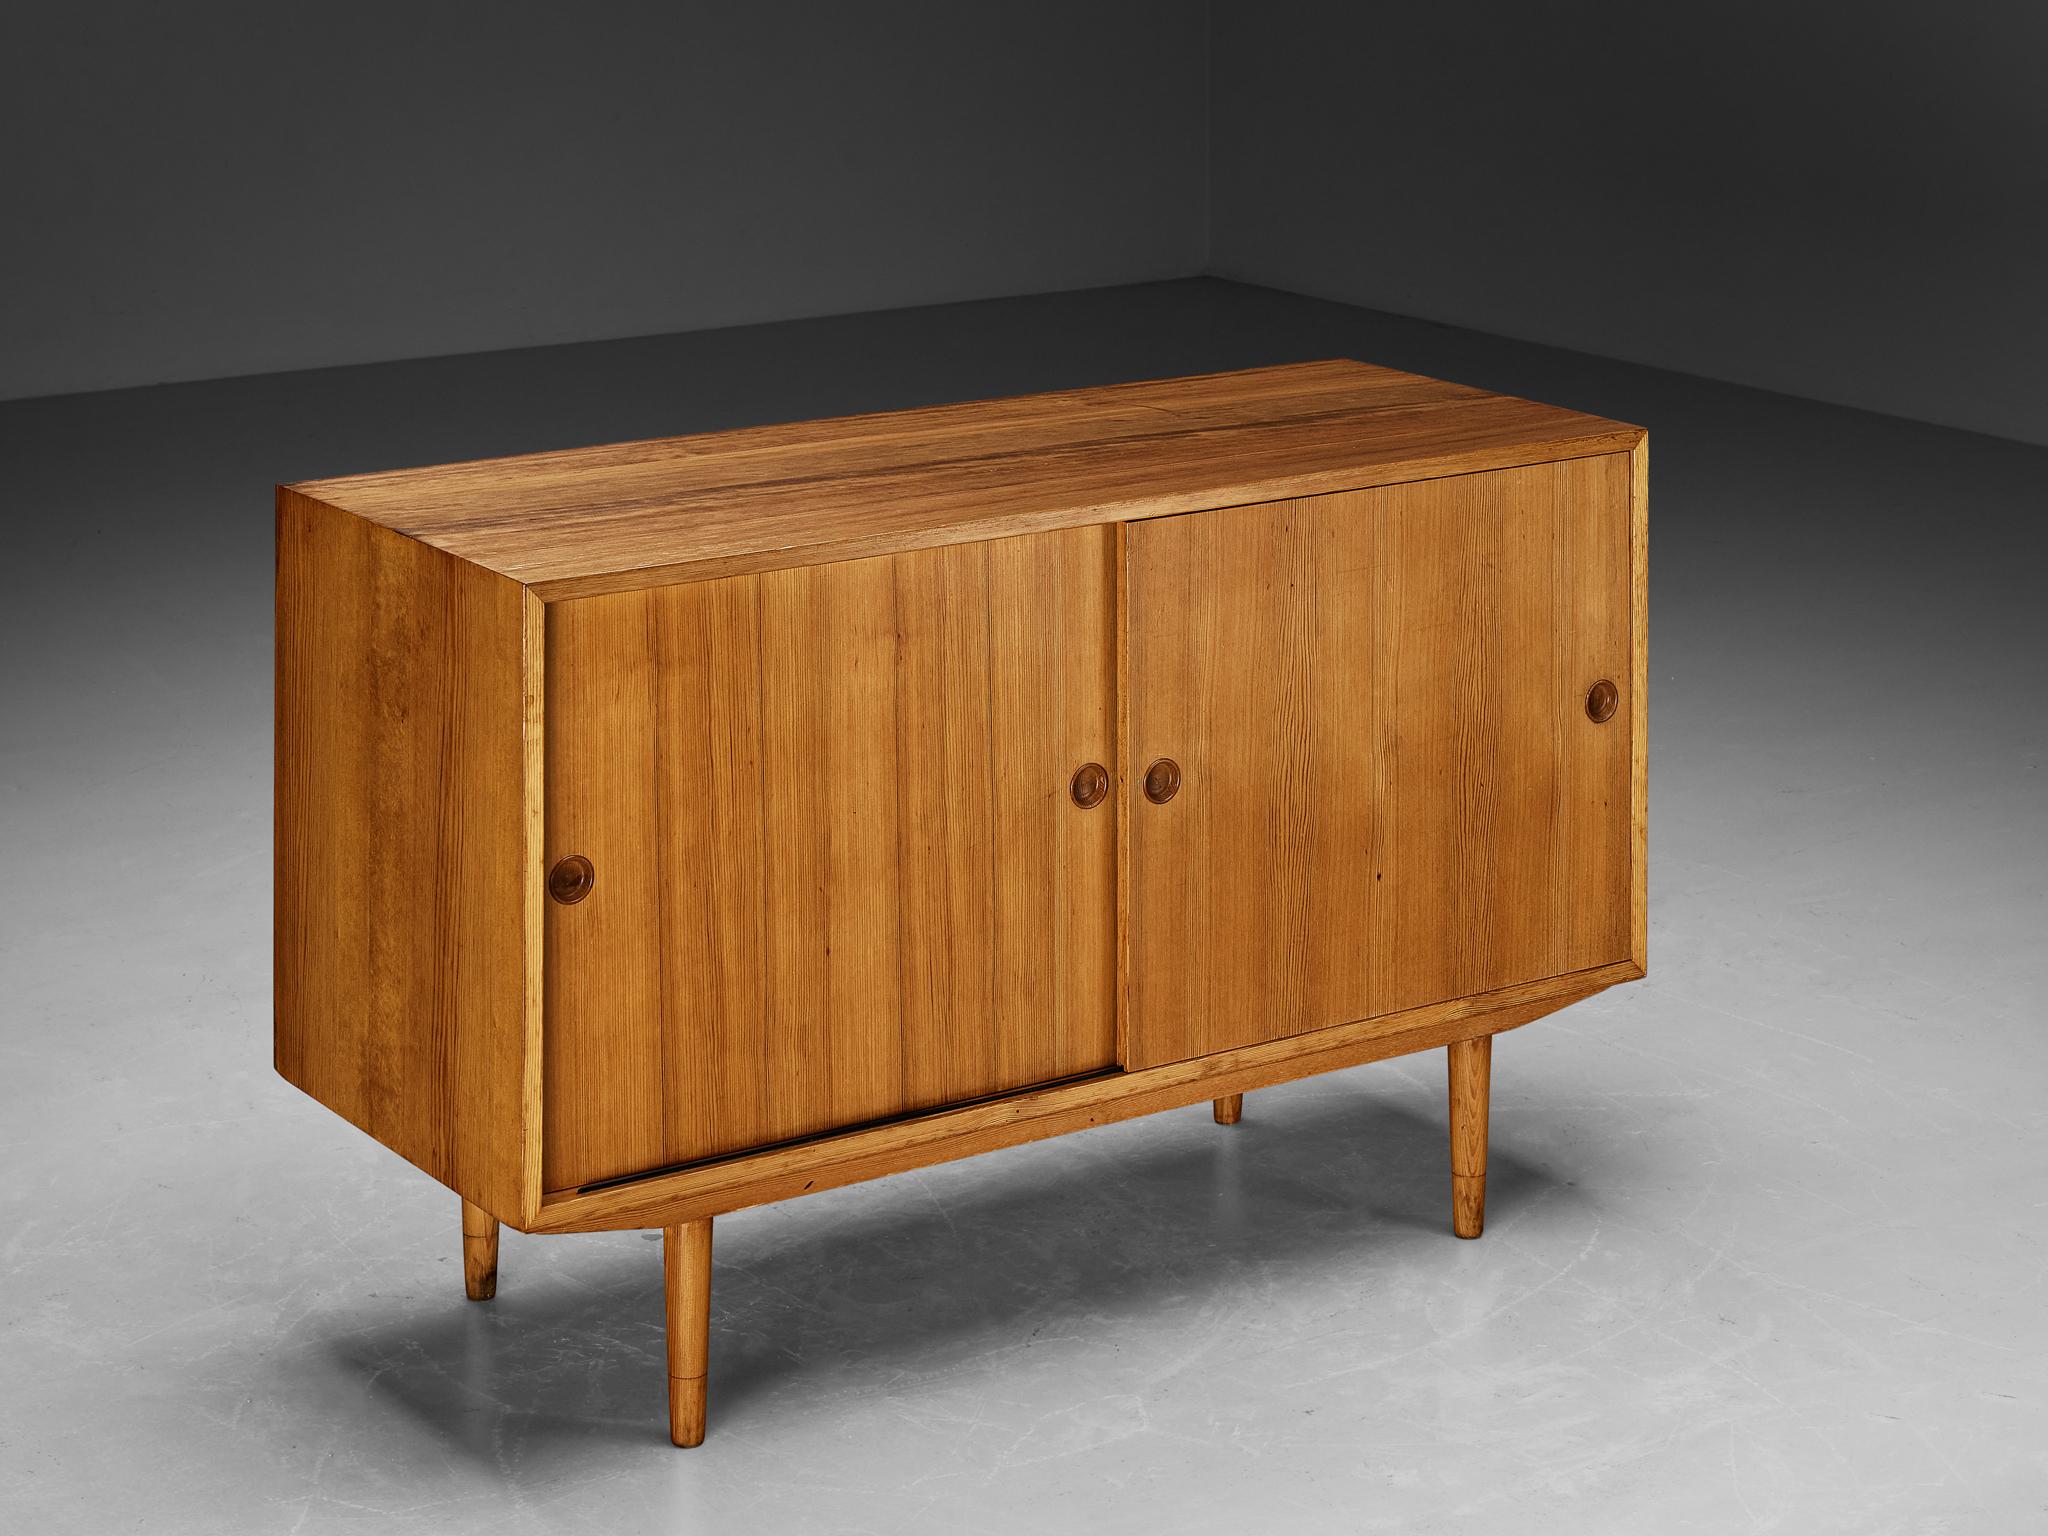 Børge Mogensen for Karl Andersson & Söner, 'Öresund' cabinet, Oregon pine, Denmark, 1960s

A neat and uncomplicated sideboard designed by the Danish master Børge Mogensen in the sixties. The piece contains a cubic shape defined by straight and